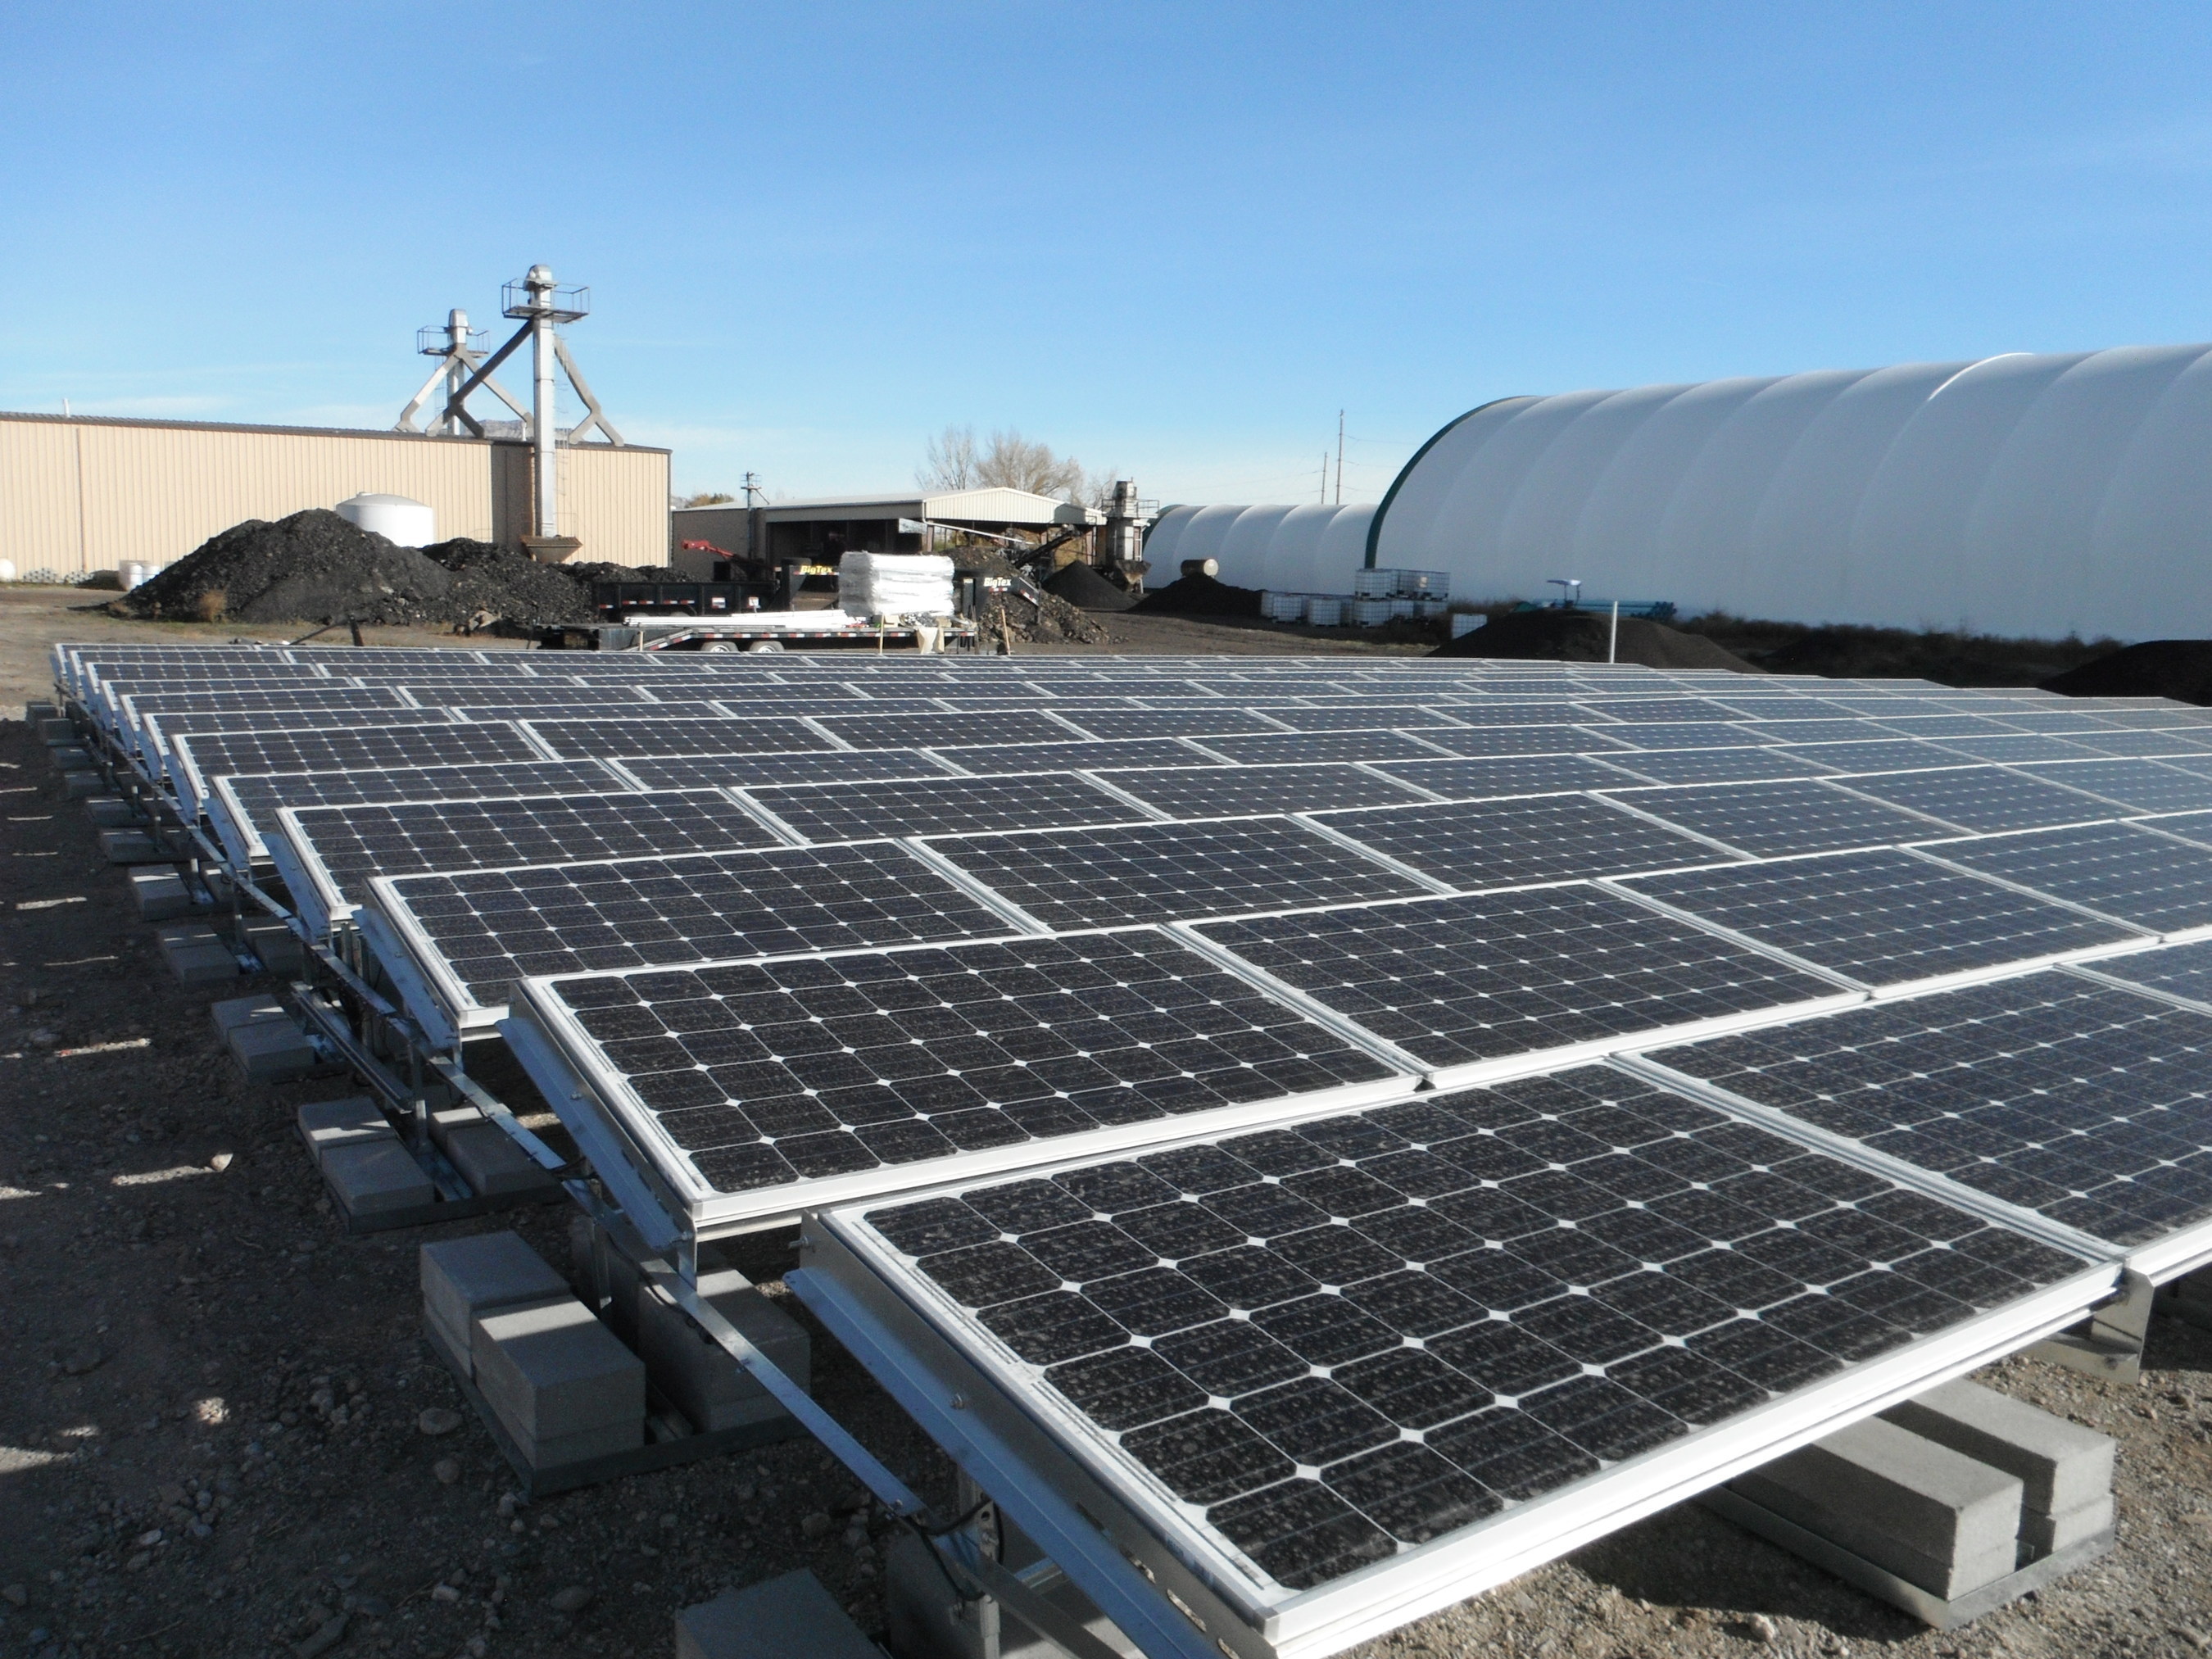 SolarWorld panels installed by Utah-based company Live Earth Products will significantly decrease energy consumption.